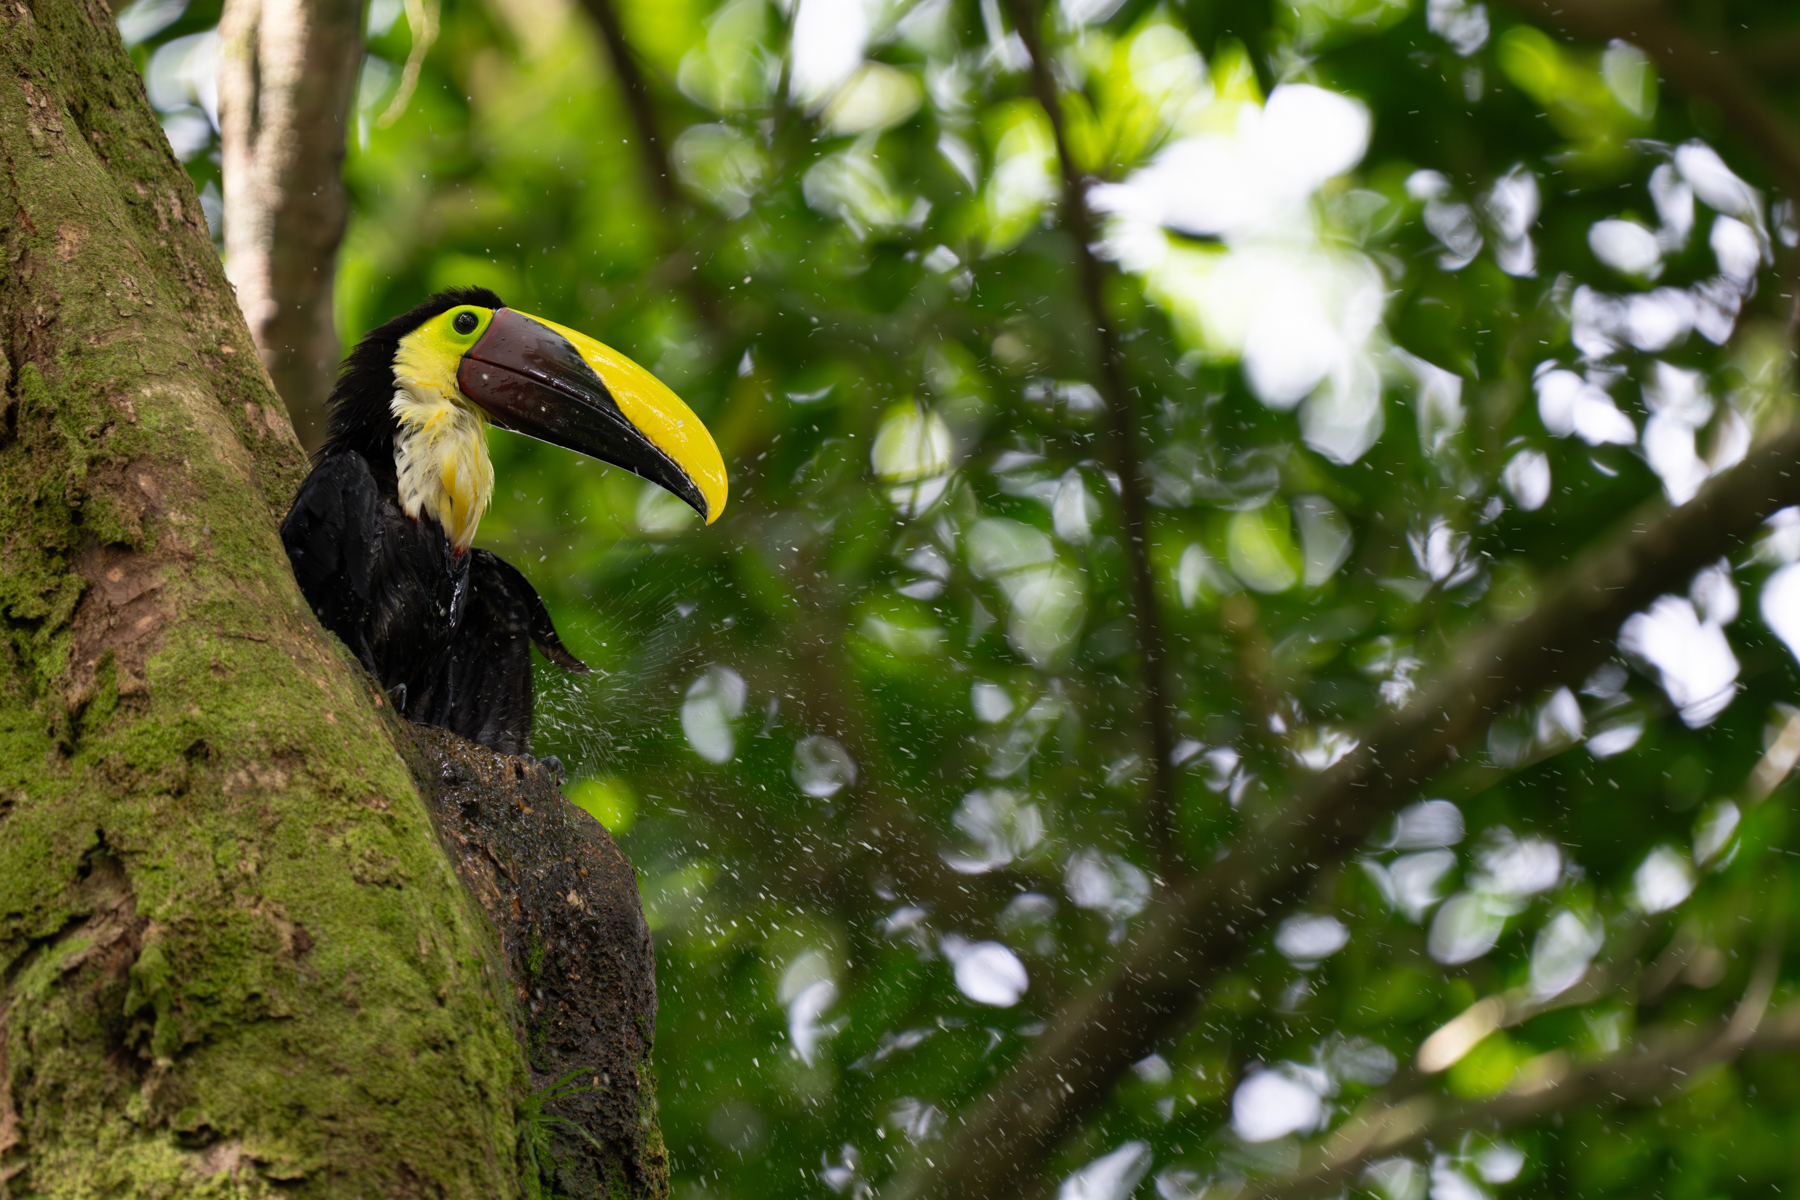 A Yellow-throated Toucan cools off in his tree-trunk plunge pool (image by Inger Vandyke)